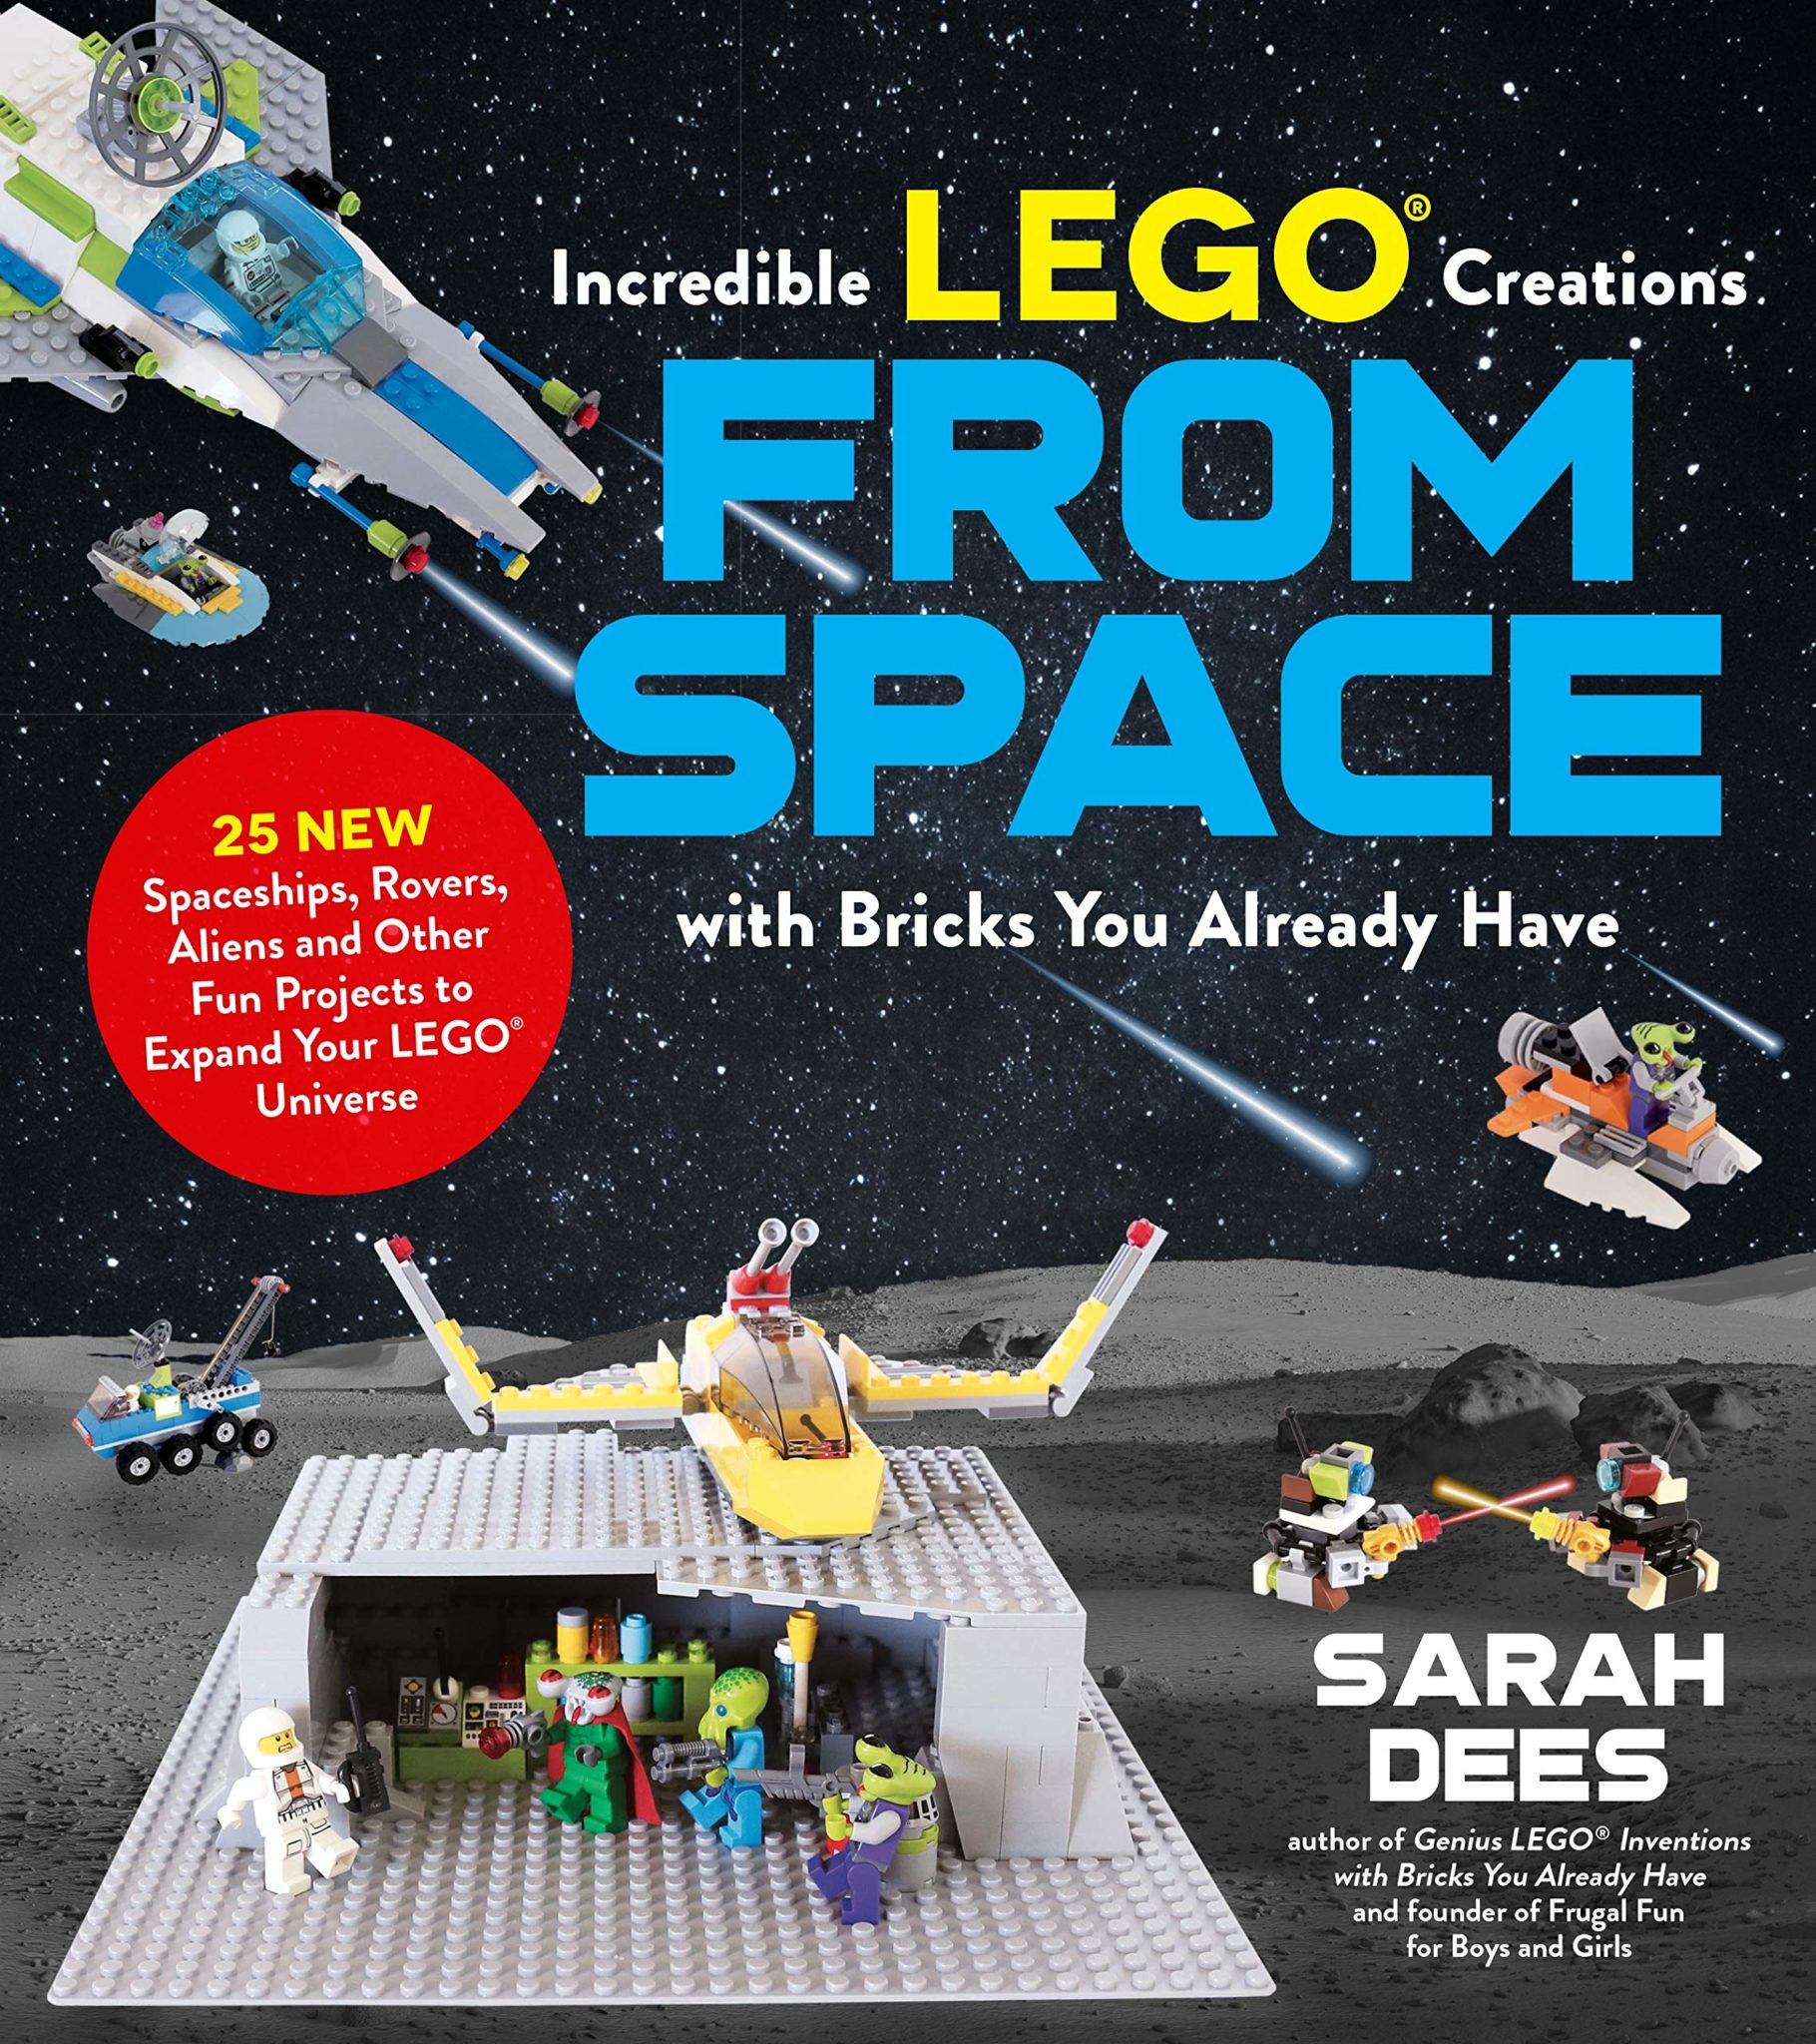 LEGO Owl Building Instructions - Frugal Fun For Boys and Girls